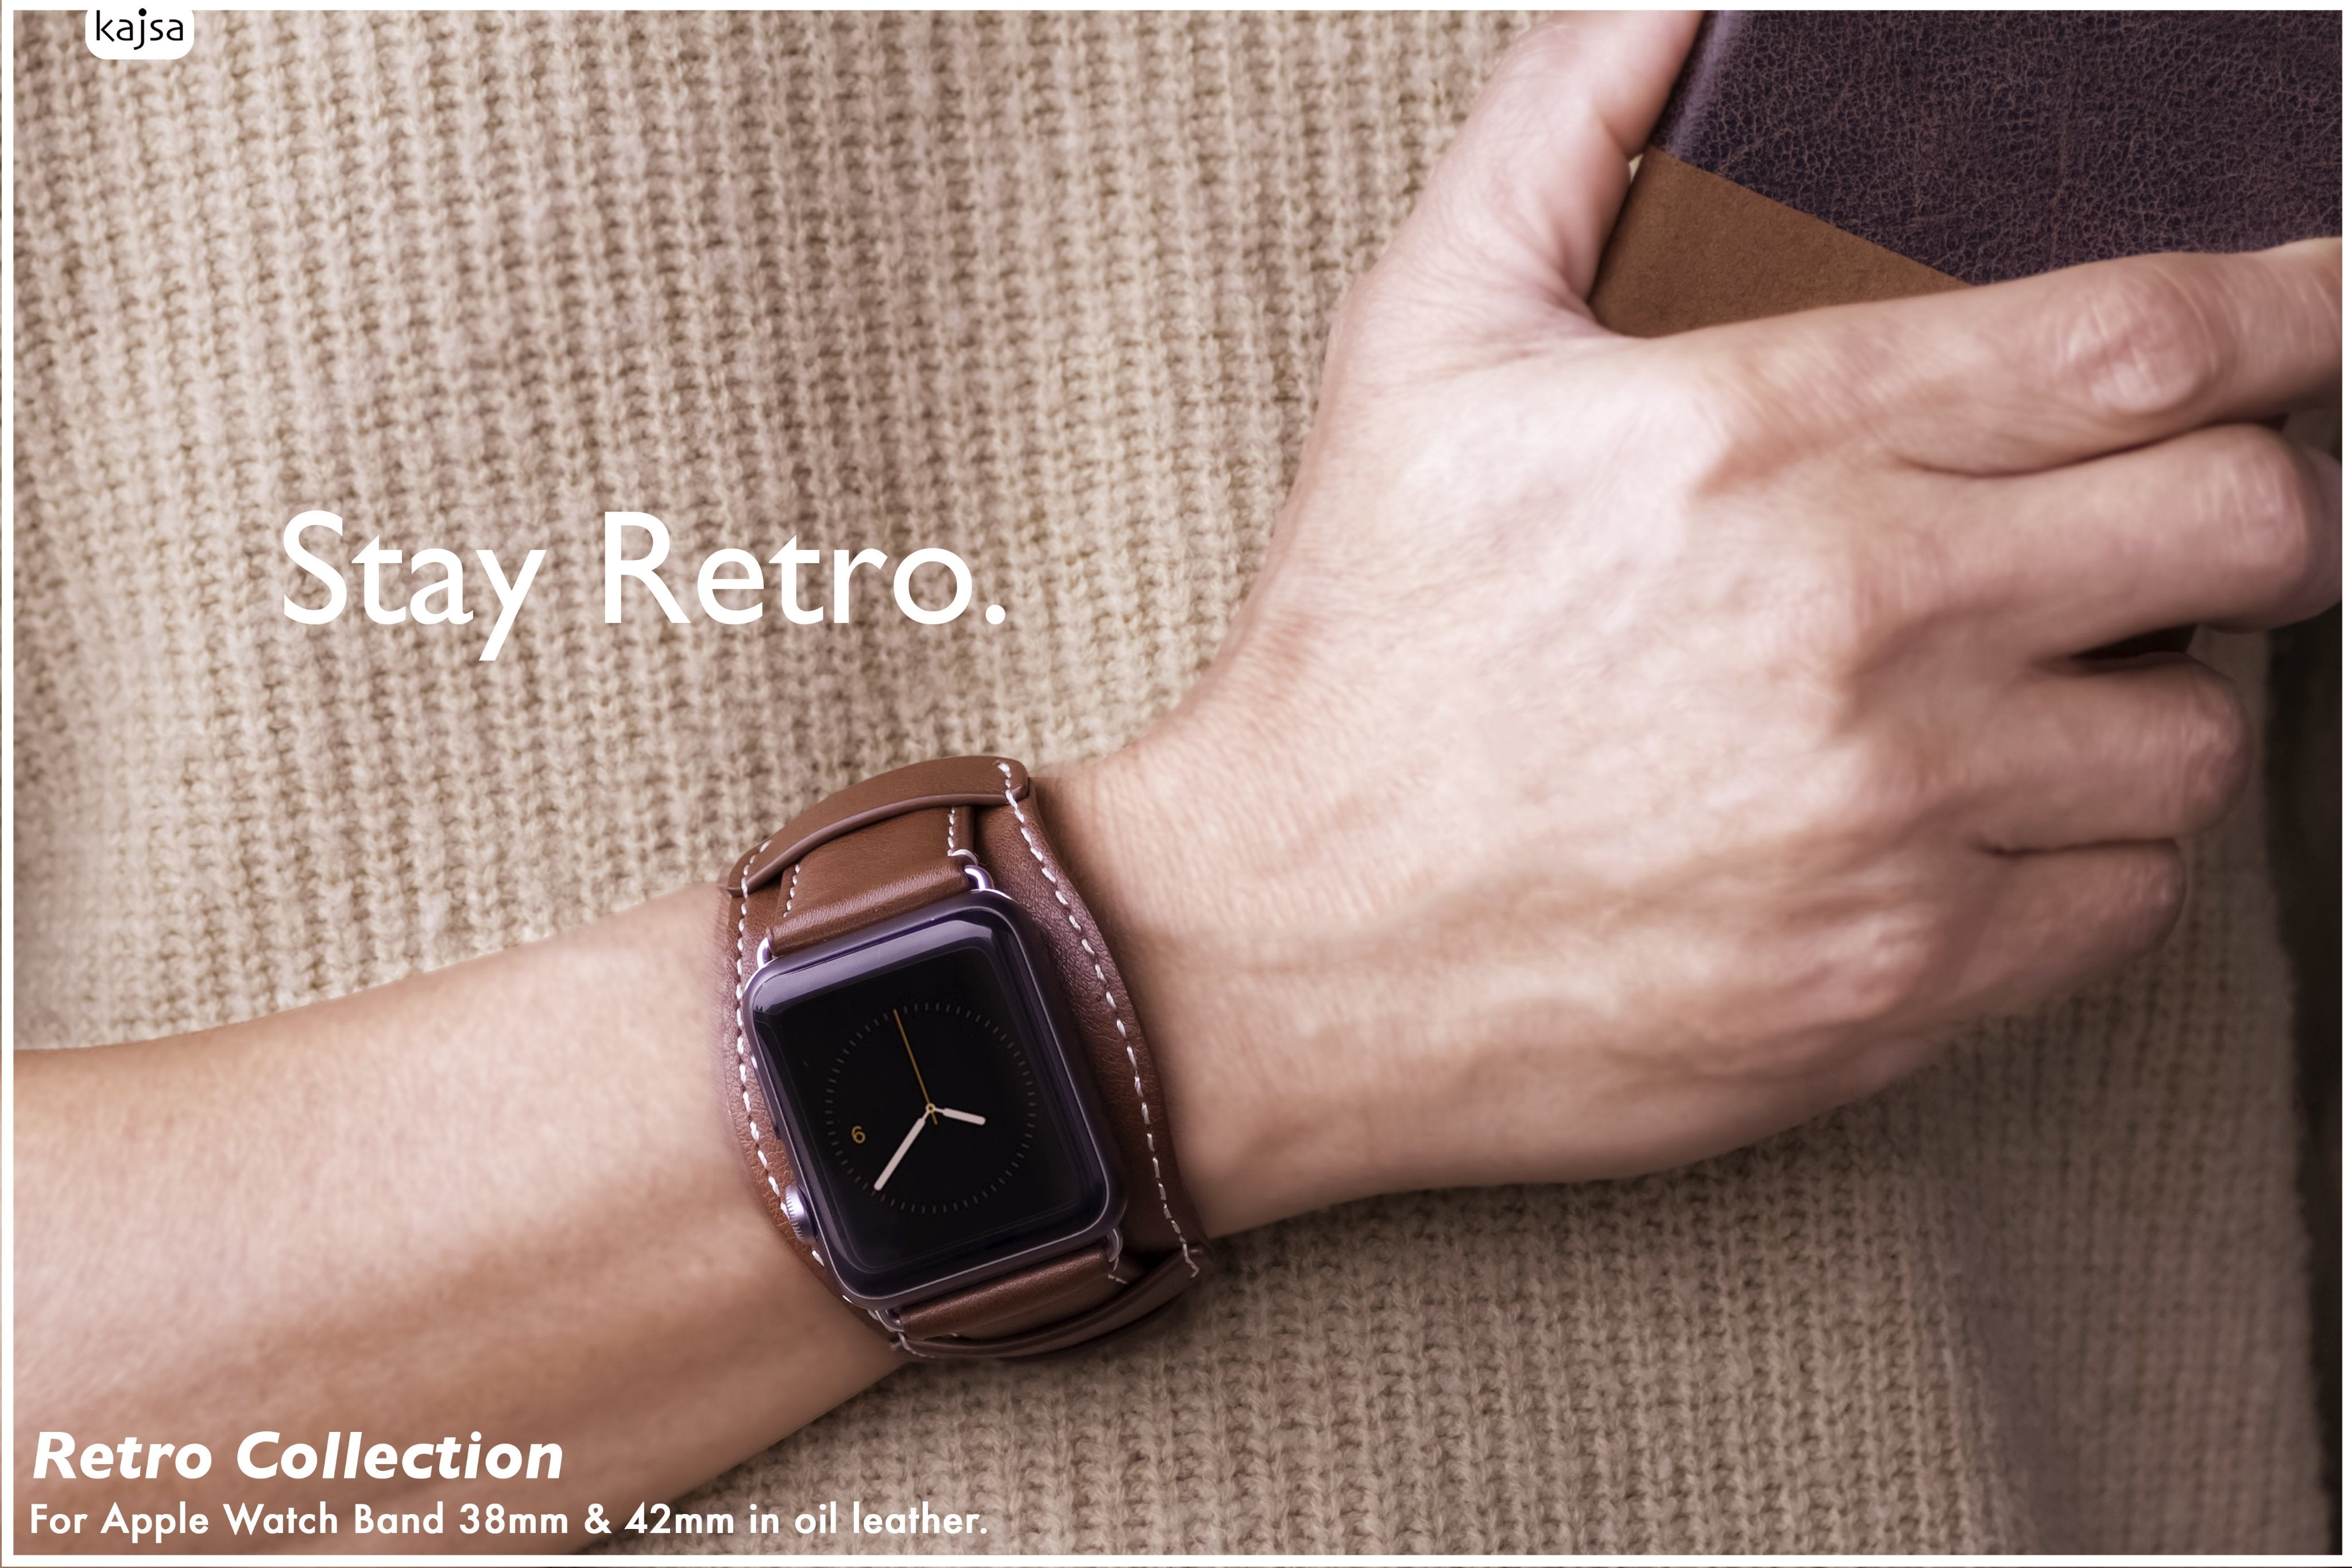 Retro Collection - Handcrafted Leather Apple Watch Band-Watch Band- phone case - phone cases- phone cover- iphone cover- iphone case- iphone cases- leather case- leather cases- DIYCASE - custom case - leather cover - hand strap case - croco pattern case - snake pattern case - carbon fiber phone case - phone case brand - unique phone case - high quality - phone case brand - protective case - buy phone case hong kong - online buy phone case - iphone‎手機殼 - 客製化手機殼 - samsung ‎手機殼 - 香港手機殼 - 買電話殼